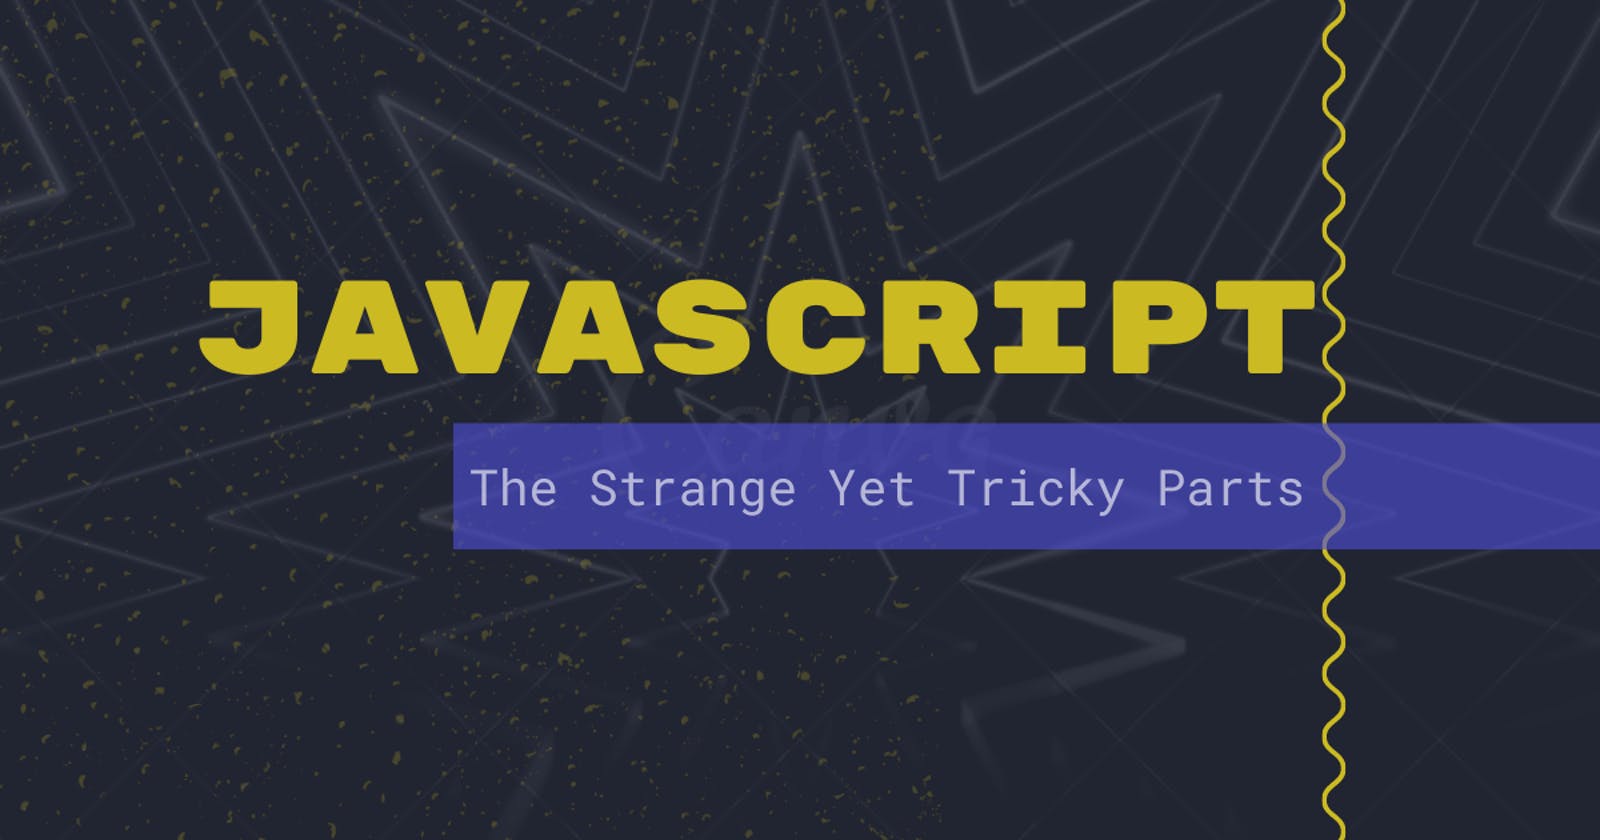 JavaScript: The Strange Yet Tricky Parts cover image